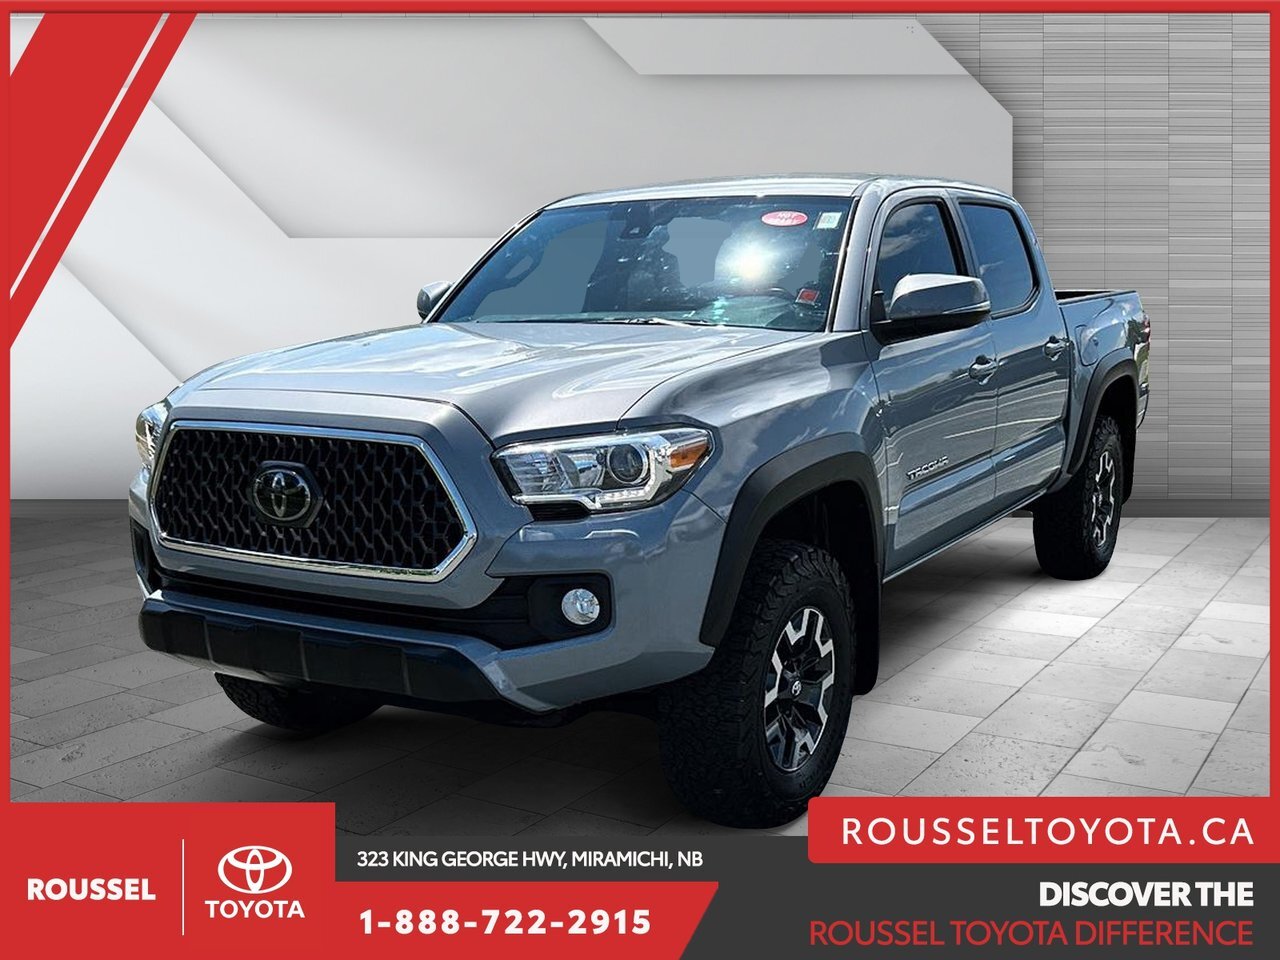 2018 Toyota Tacoma TRD Off-Road Contact for more information / Contac